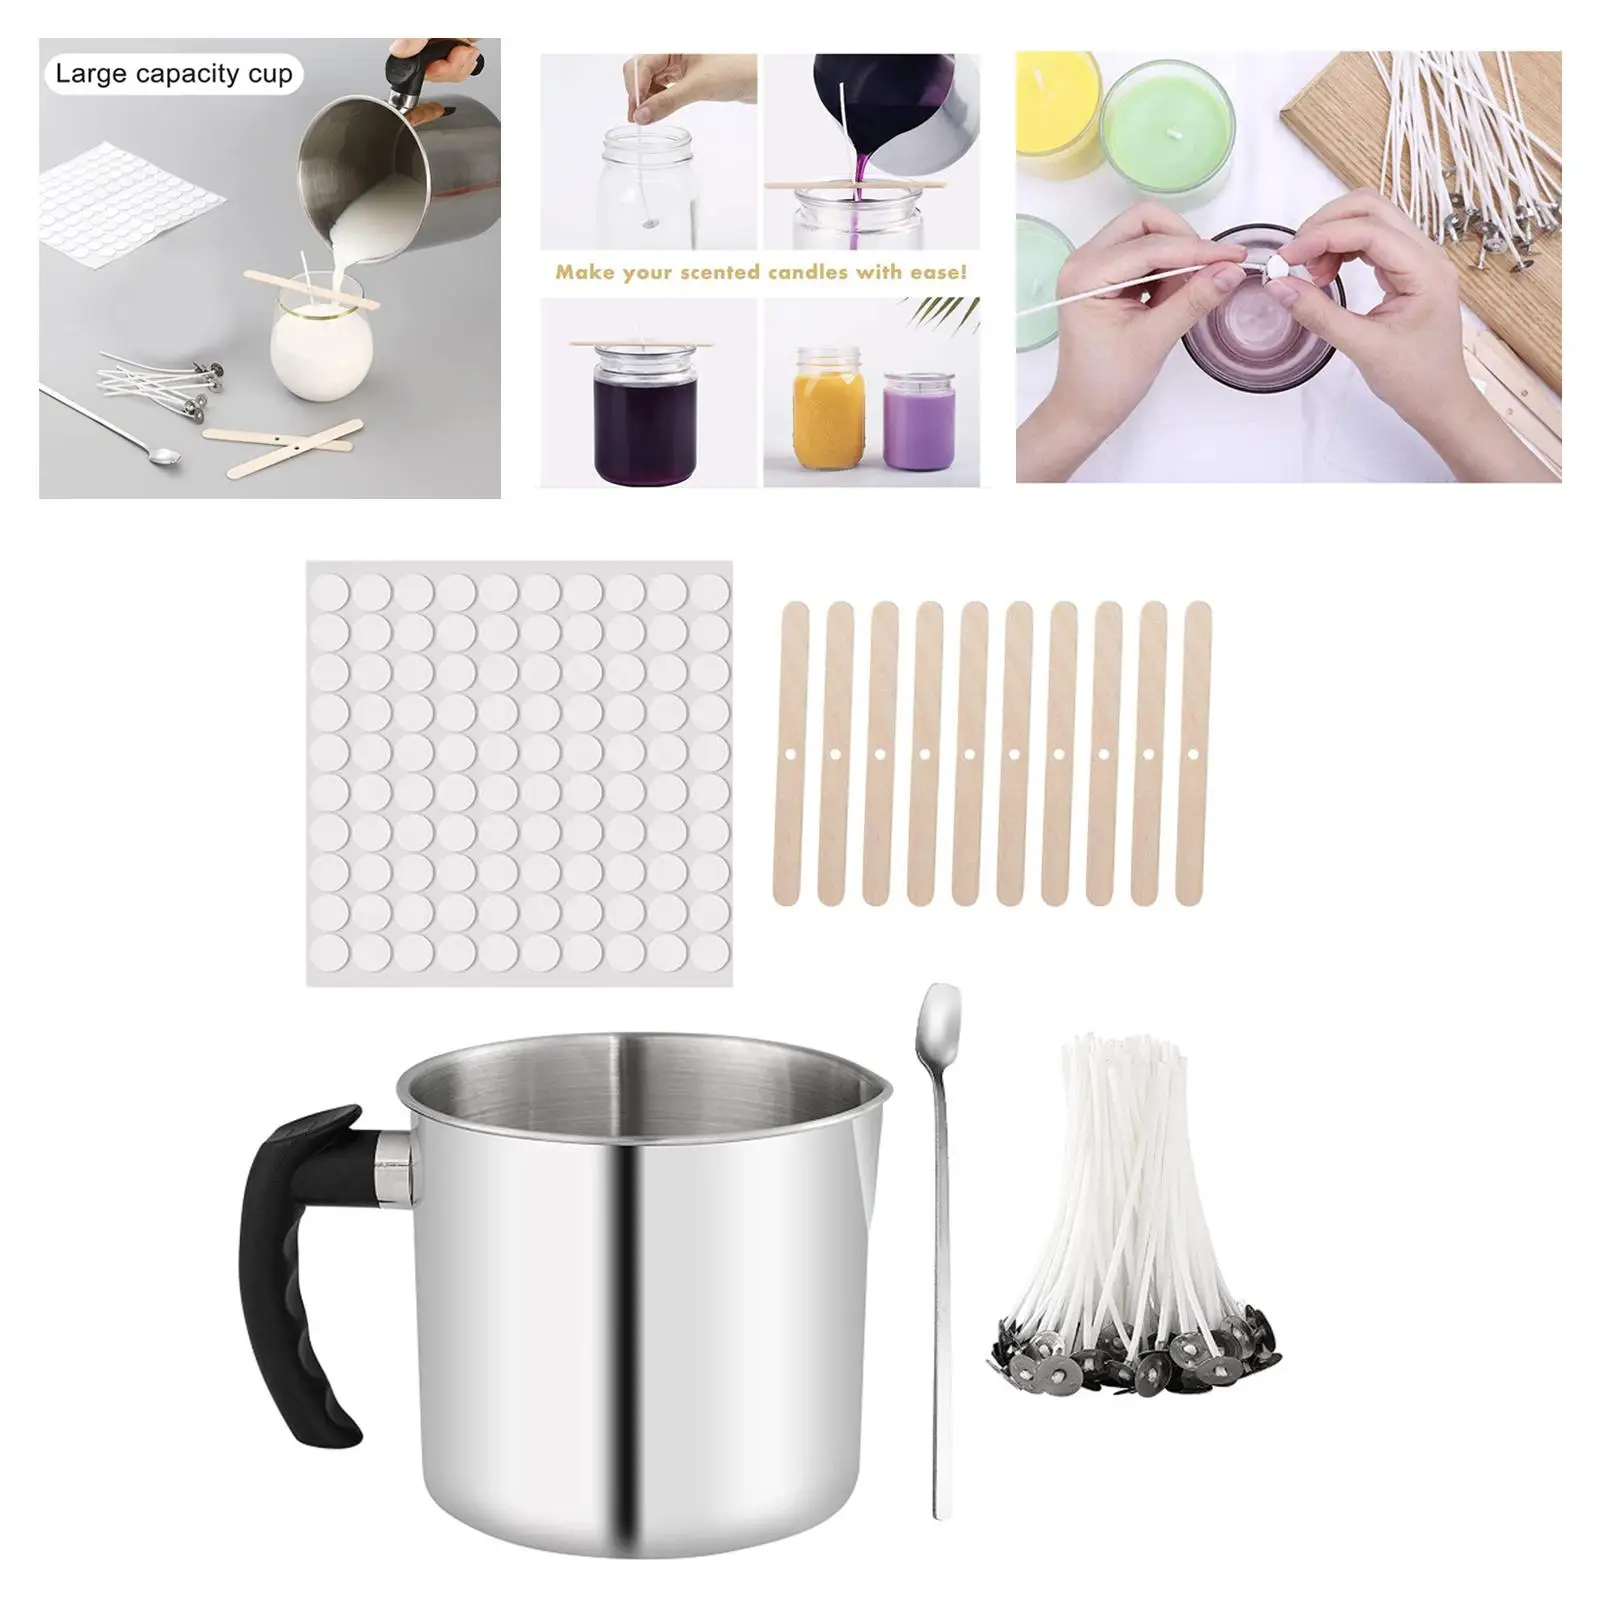 1 Set Candle Wax Melting Pouring Pot for Candle Making Wax Pouring Pitcher, Wax Making Supplies DIY Candles Craft Tools